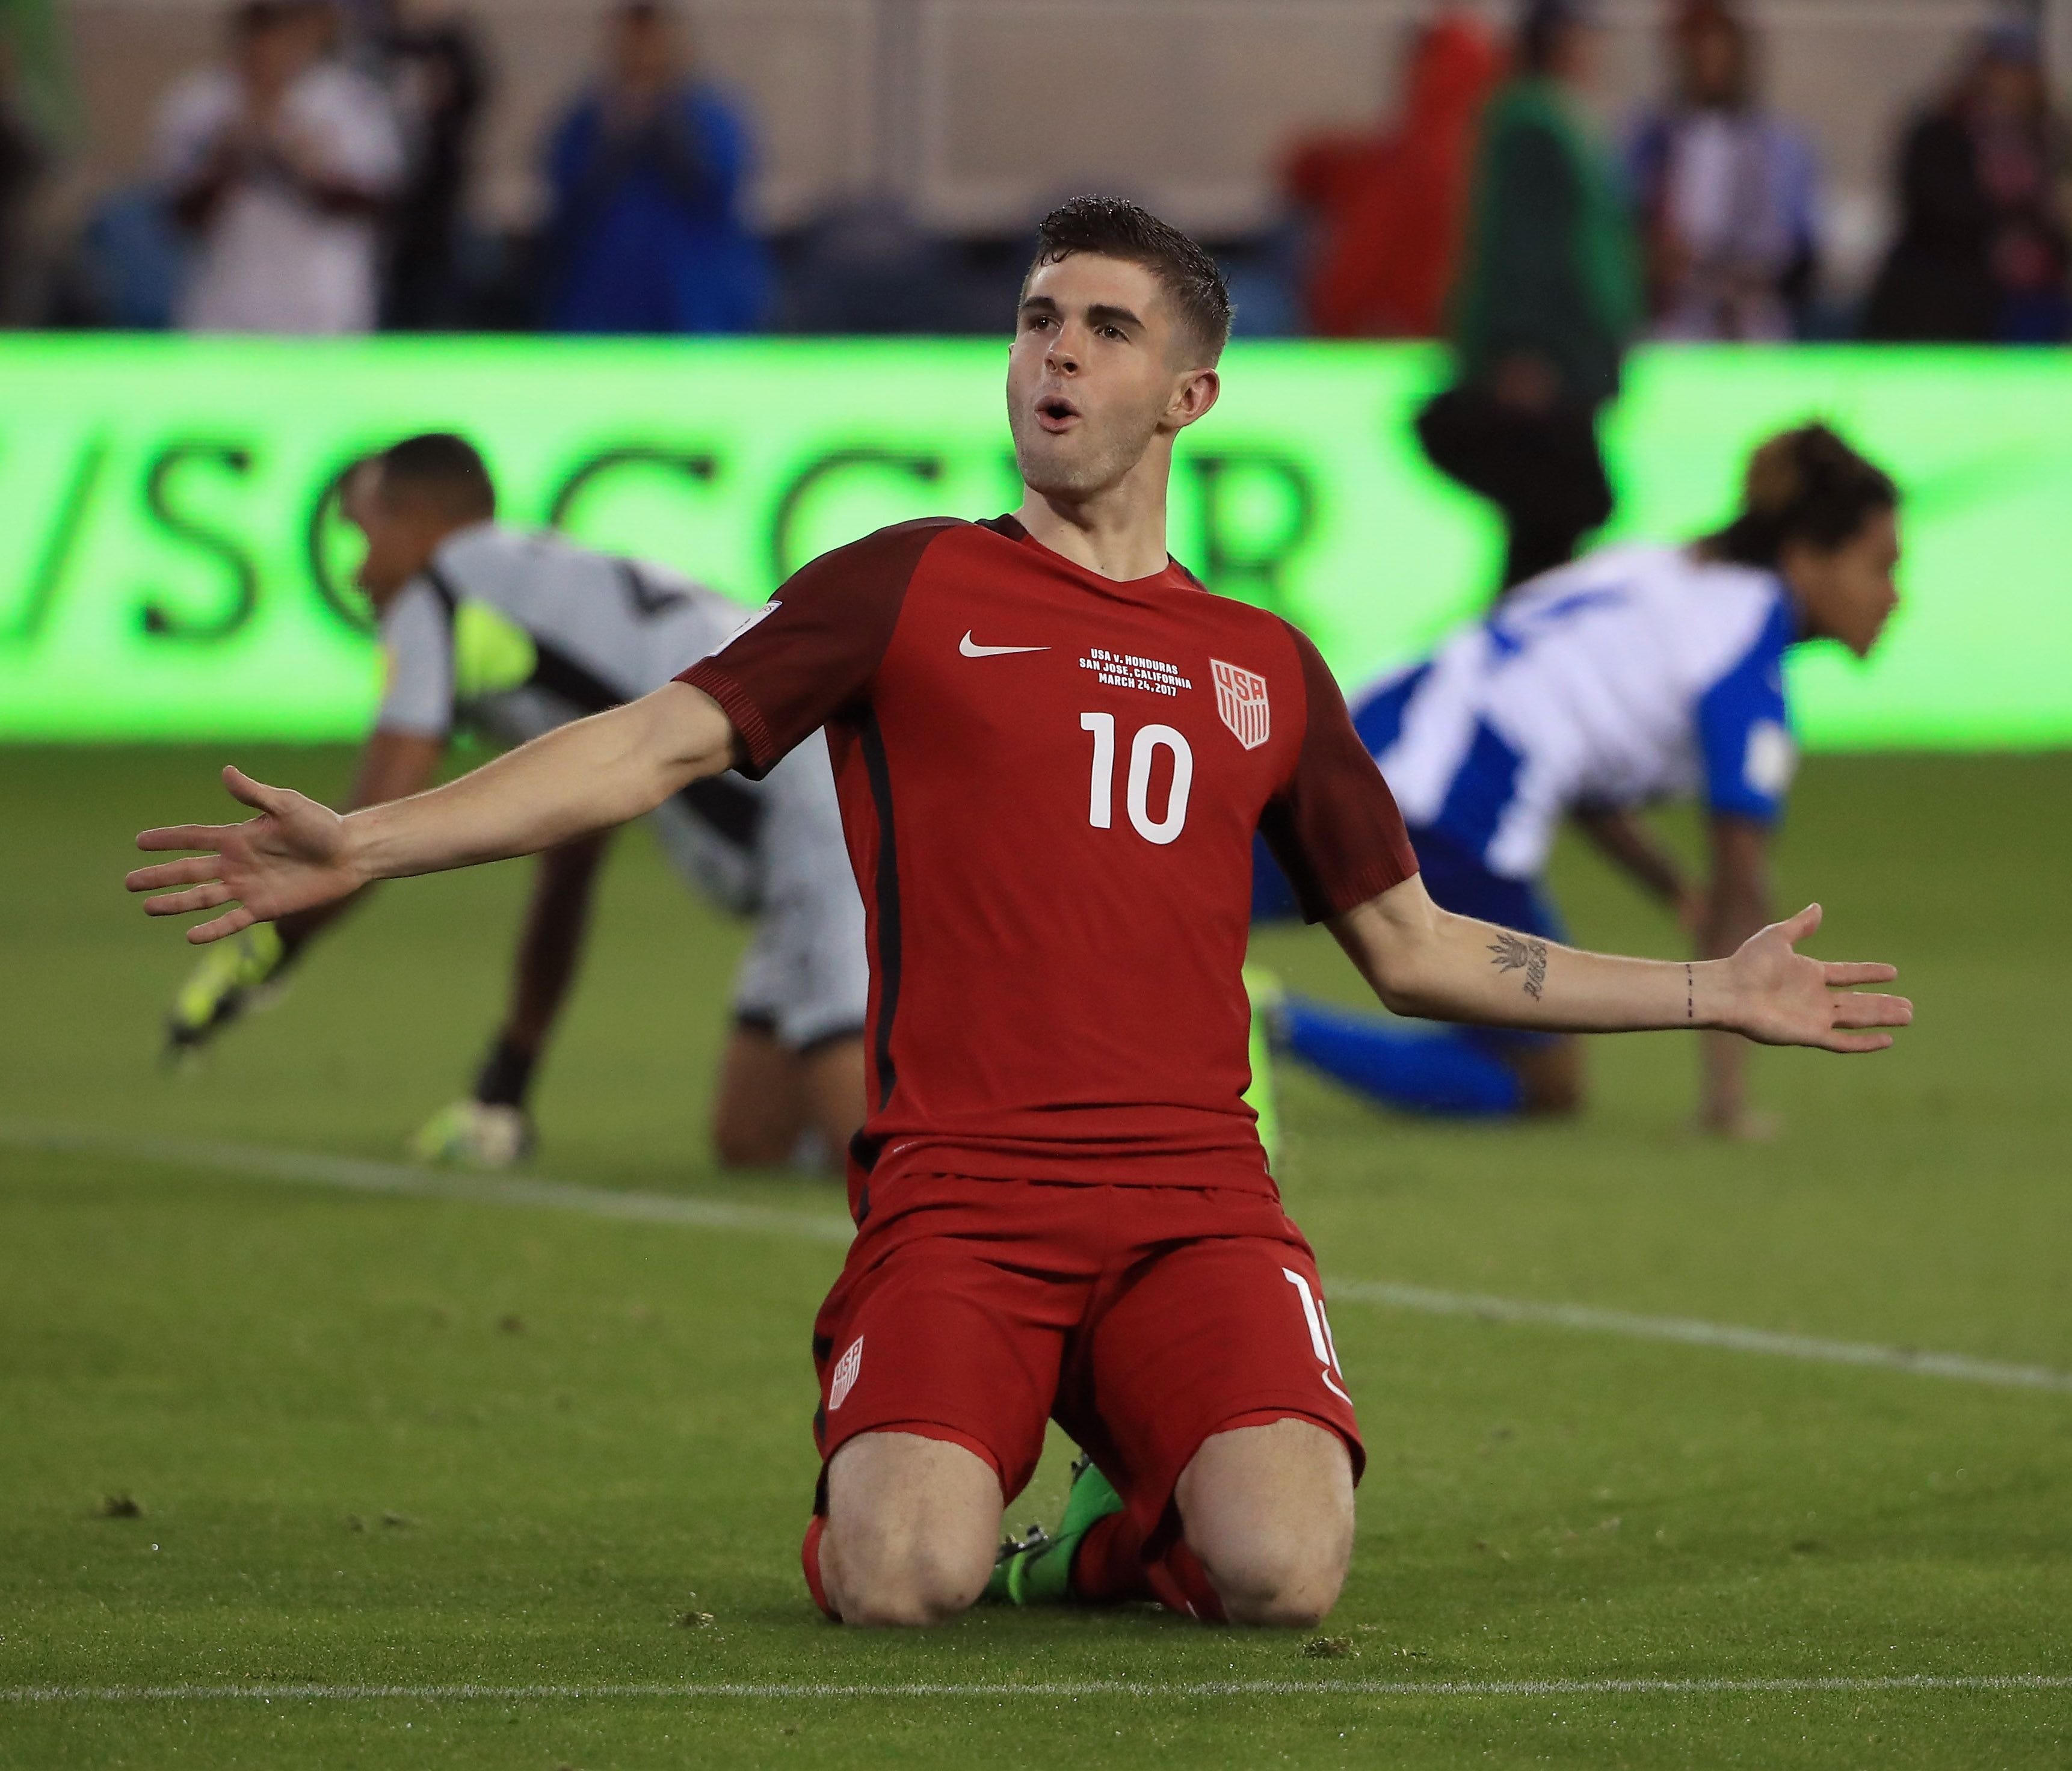 Christian Pulisic has five goals in 14 games for the U.S. men's national team.